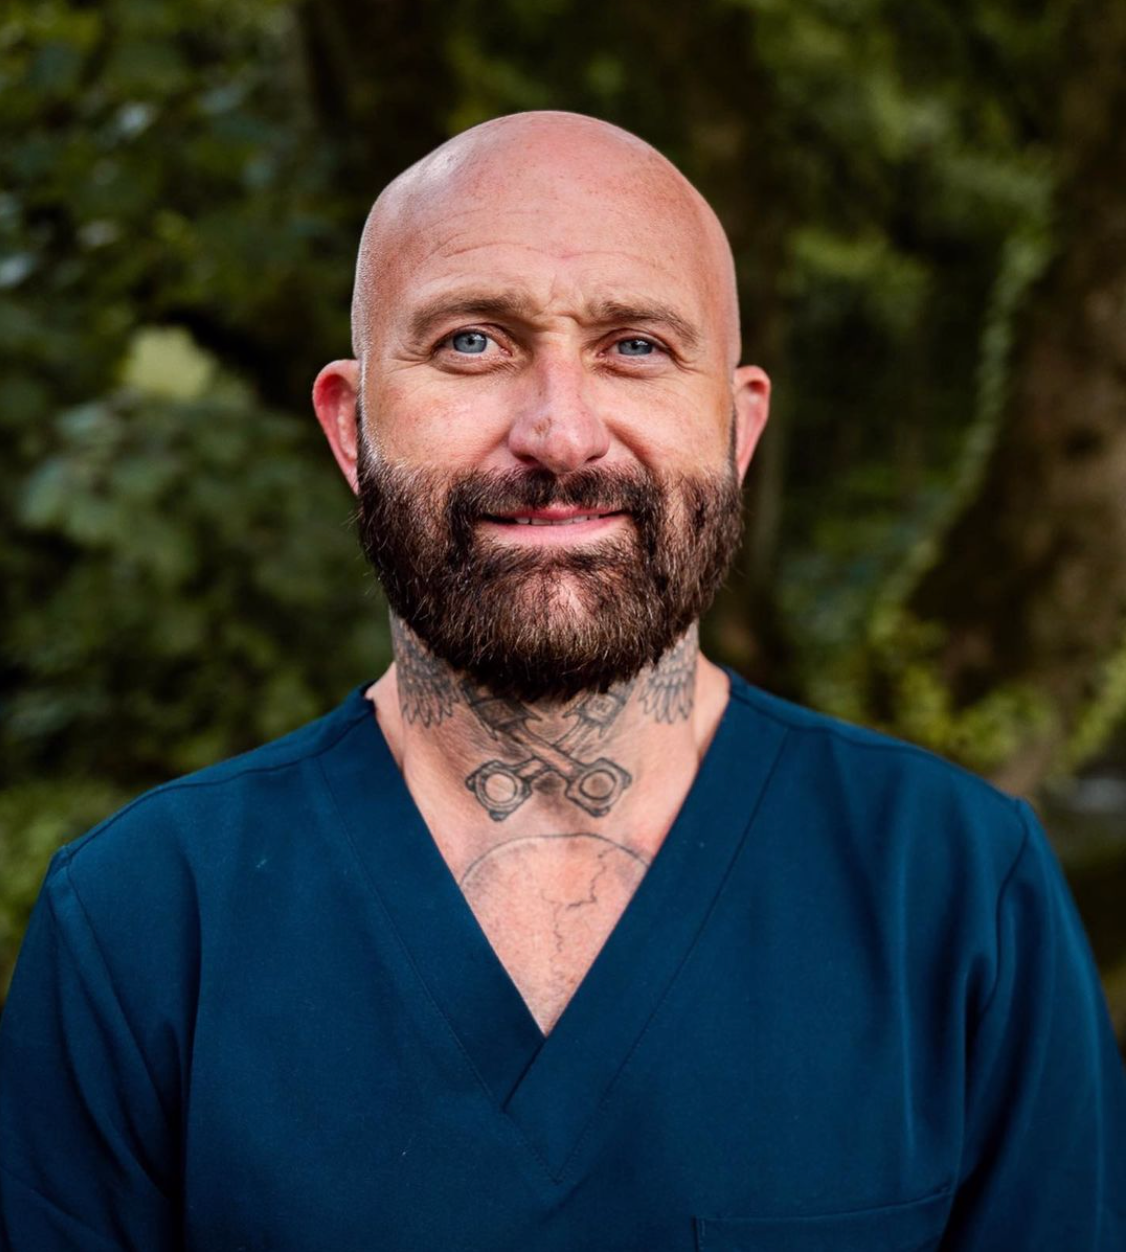 a bald man with a beard and tattoos on his neck is wearing a blue scrub top .